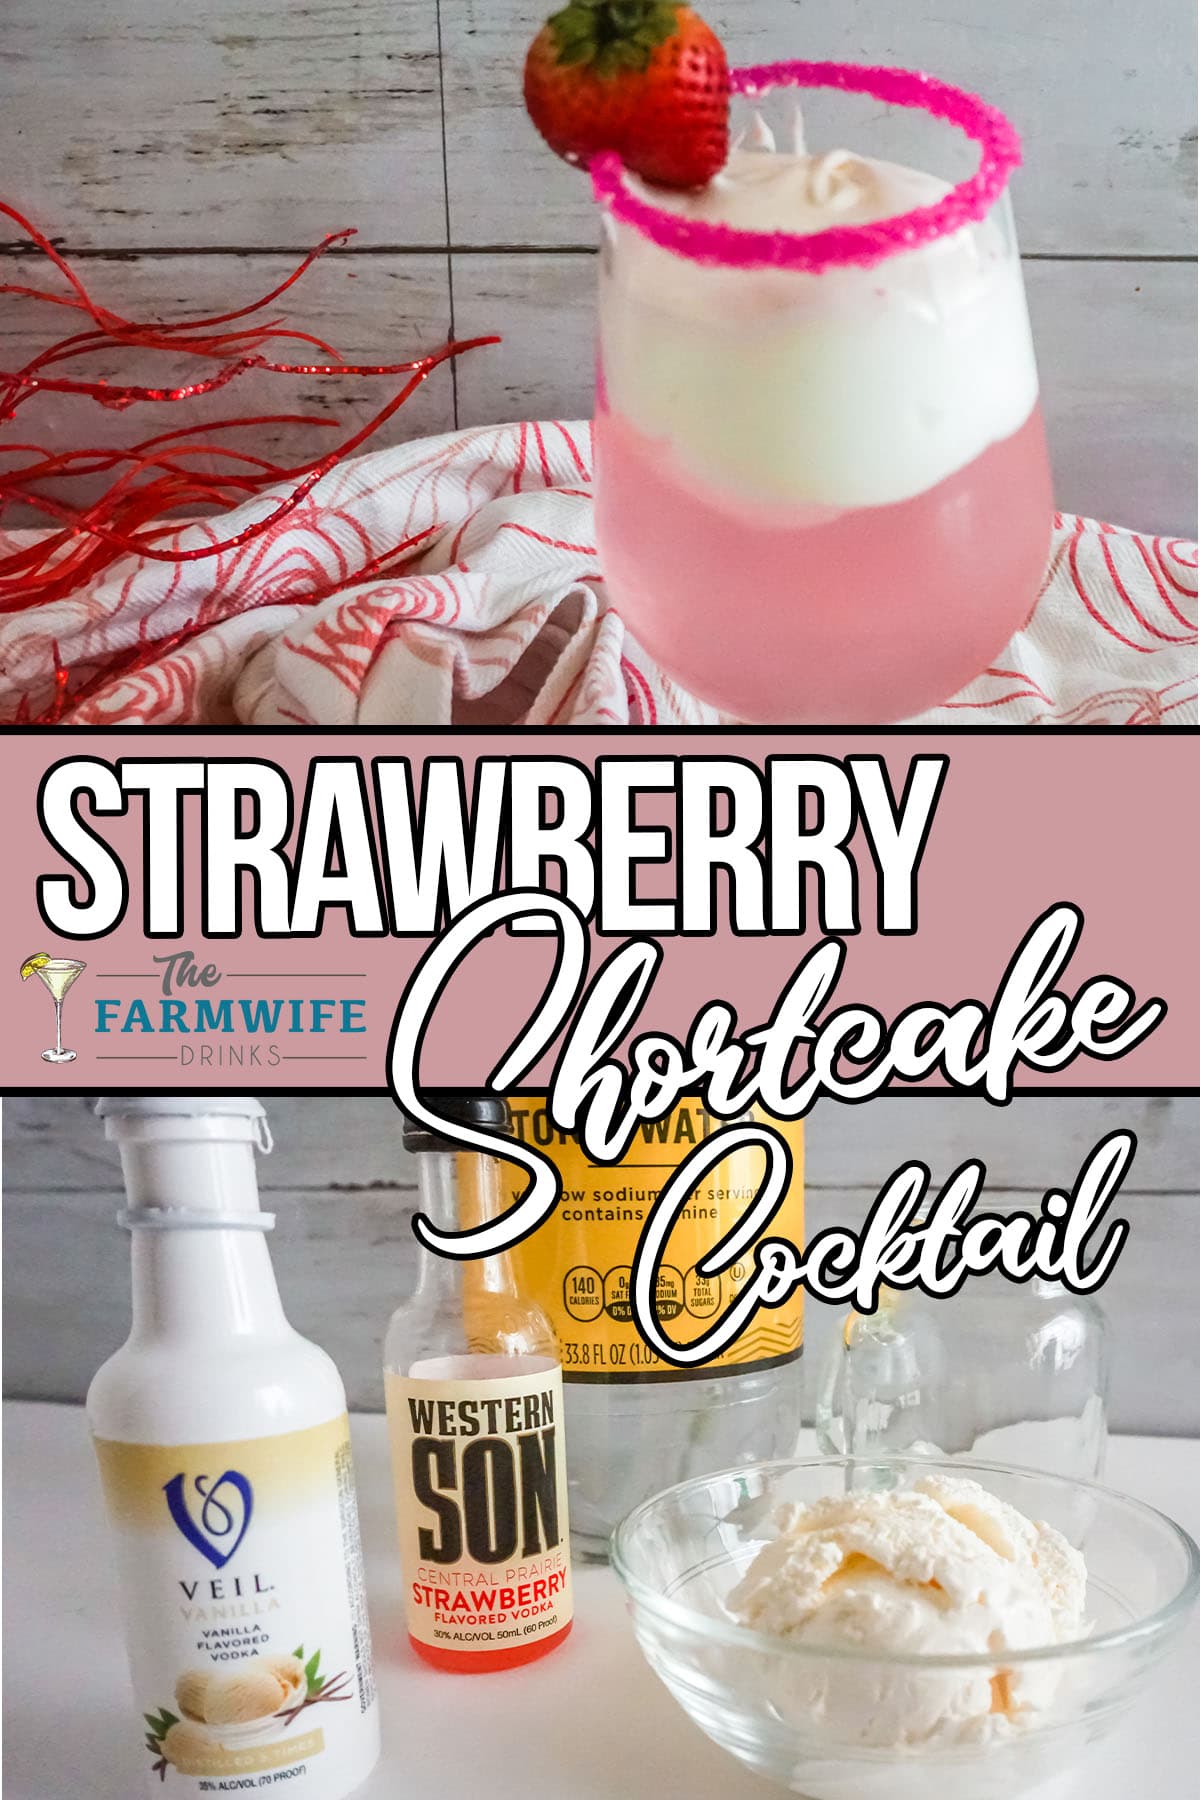 Ingredients and finished Strawberry Shortcake Cocktail.